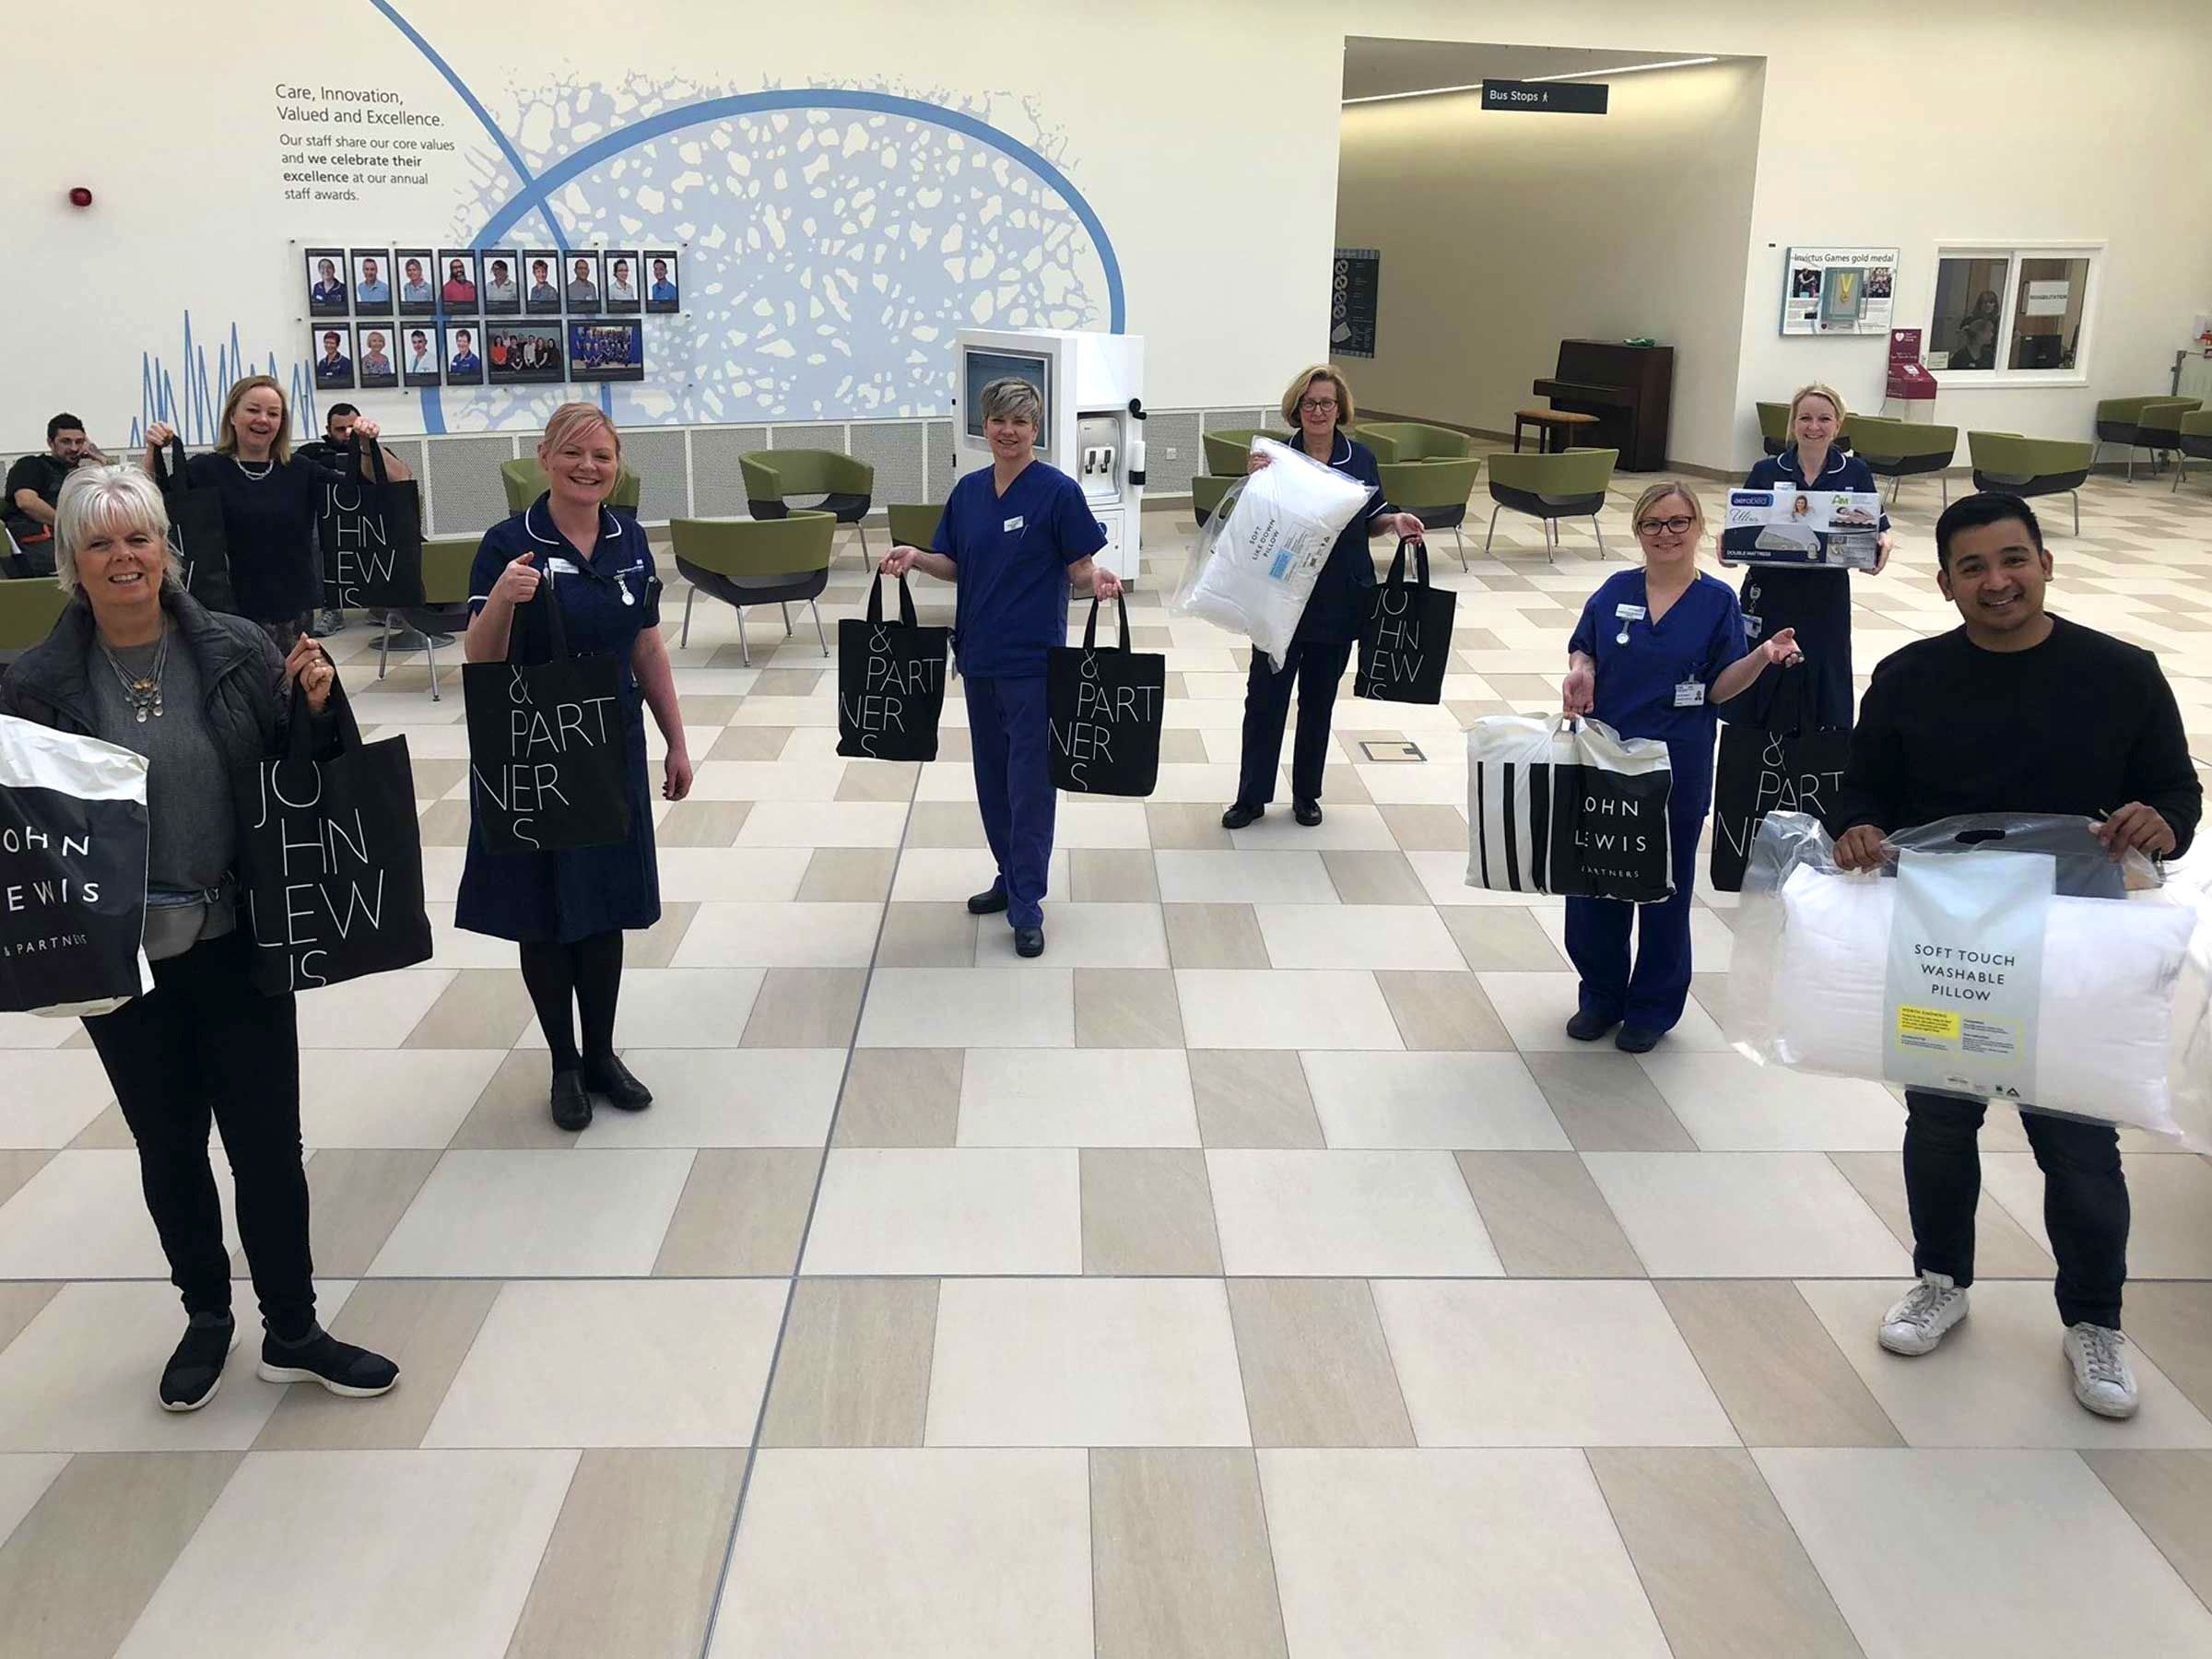 Matrons at the Royal Papworth Hospital receiving pillows, eye masks, phone chargers, air mattresses, makeup, water bottles, hand cream and plenty more from John Lewis & Partners, Cambridge